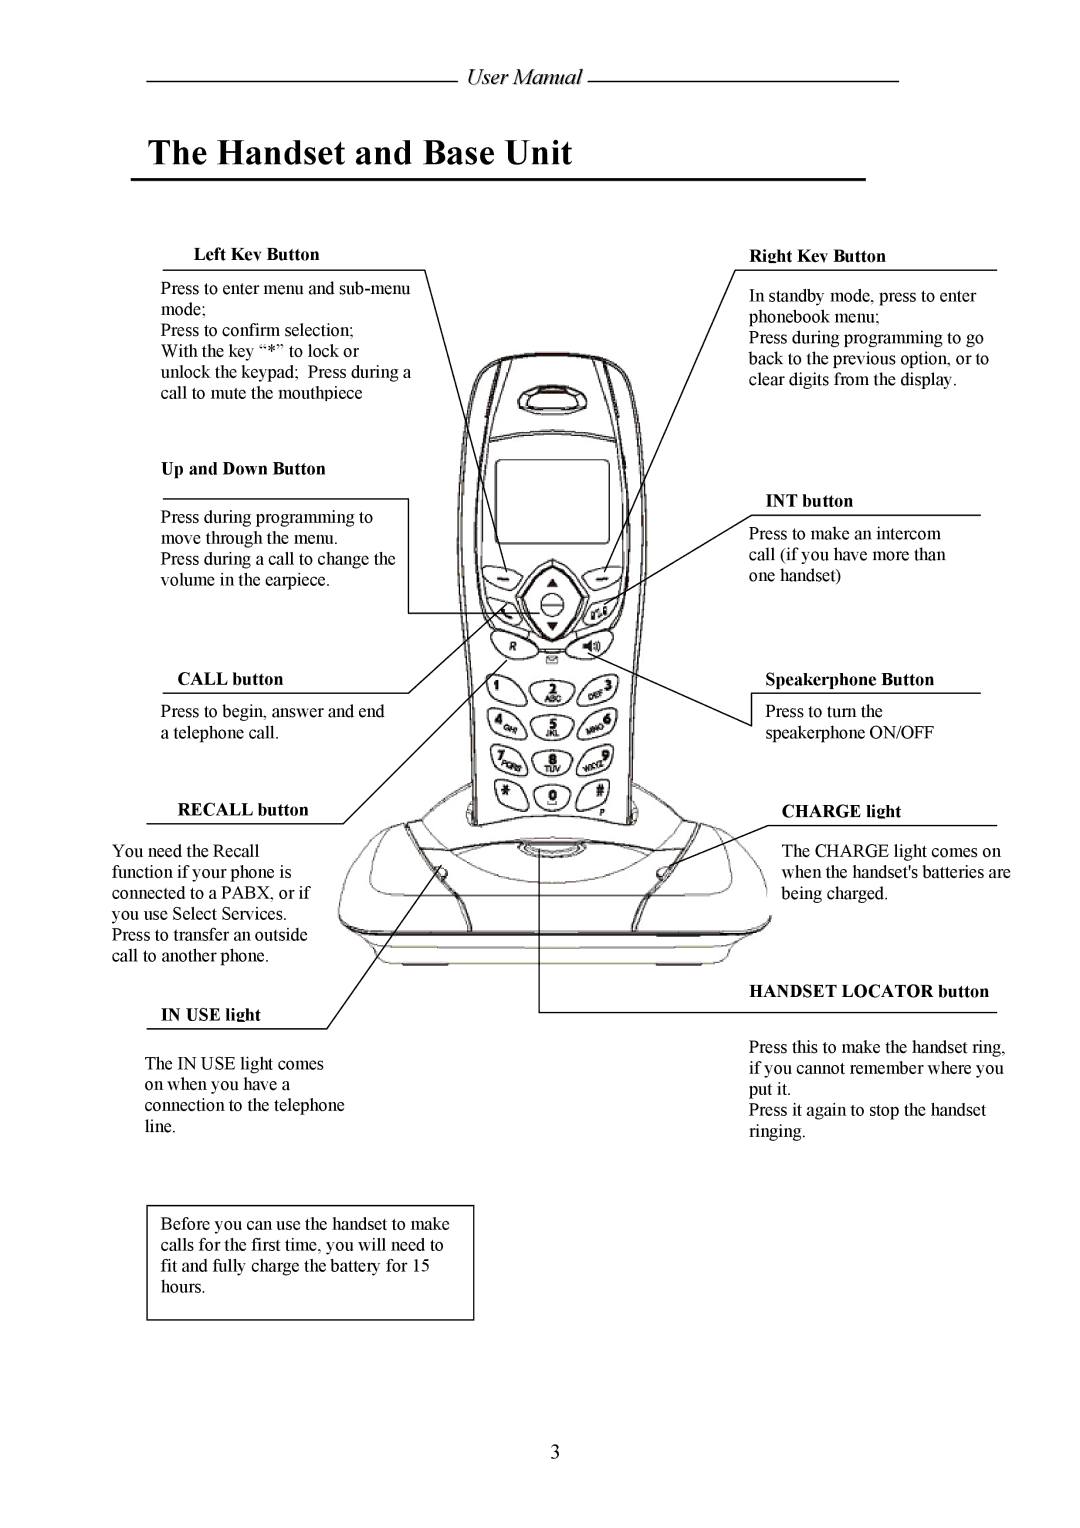 Shiro SD8421 user manual Handset and Base Unit, Left Key Button Right Key Button 